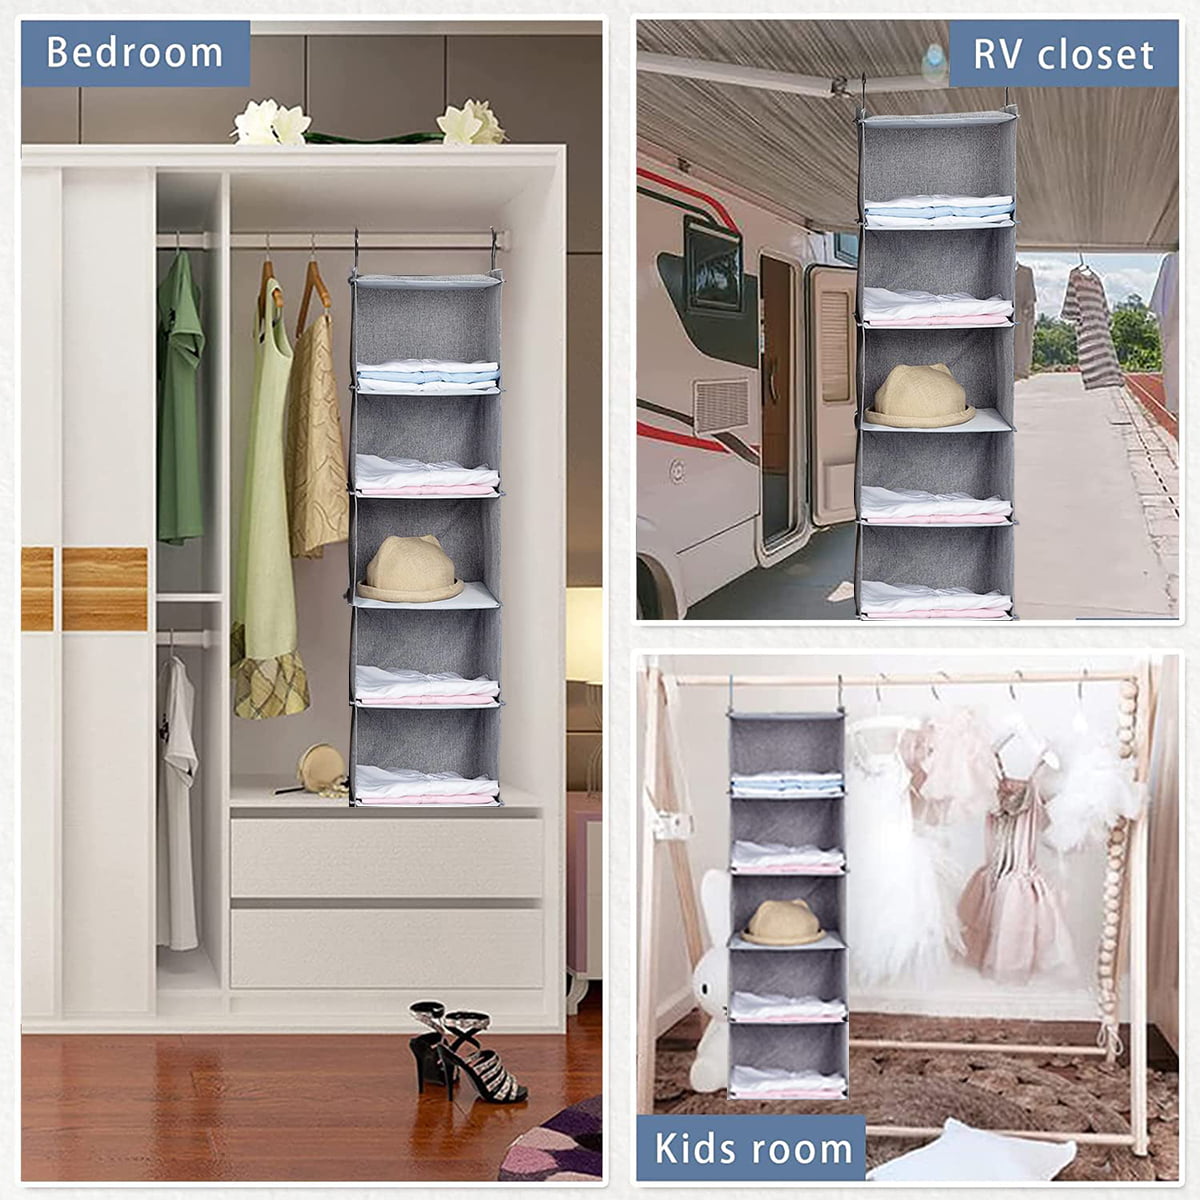  KEETDY 2-Shelf Small Hanging Closet Organizers and Storage with  2 Large Shoe Pockets Hanging Shelves Organizer for Clothes Camper Closet,  RV, Bedroom, Dorm, Grey : Home & Kitchen